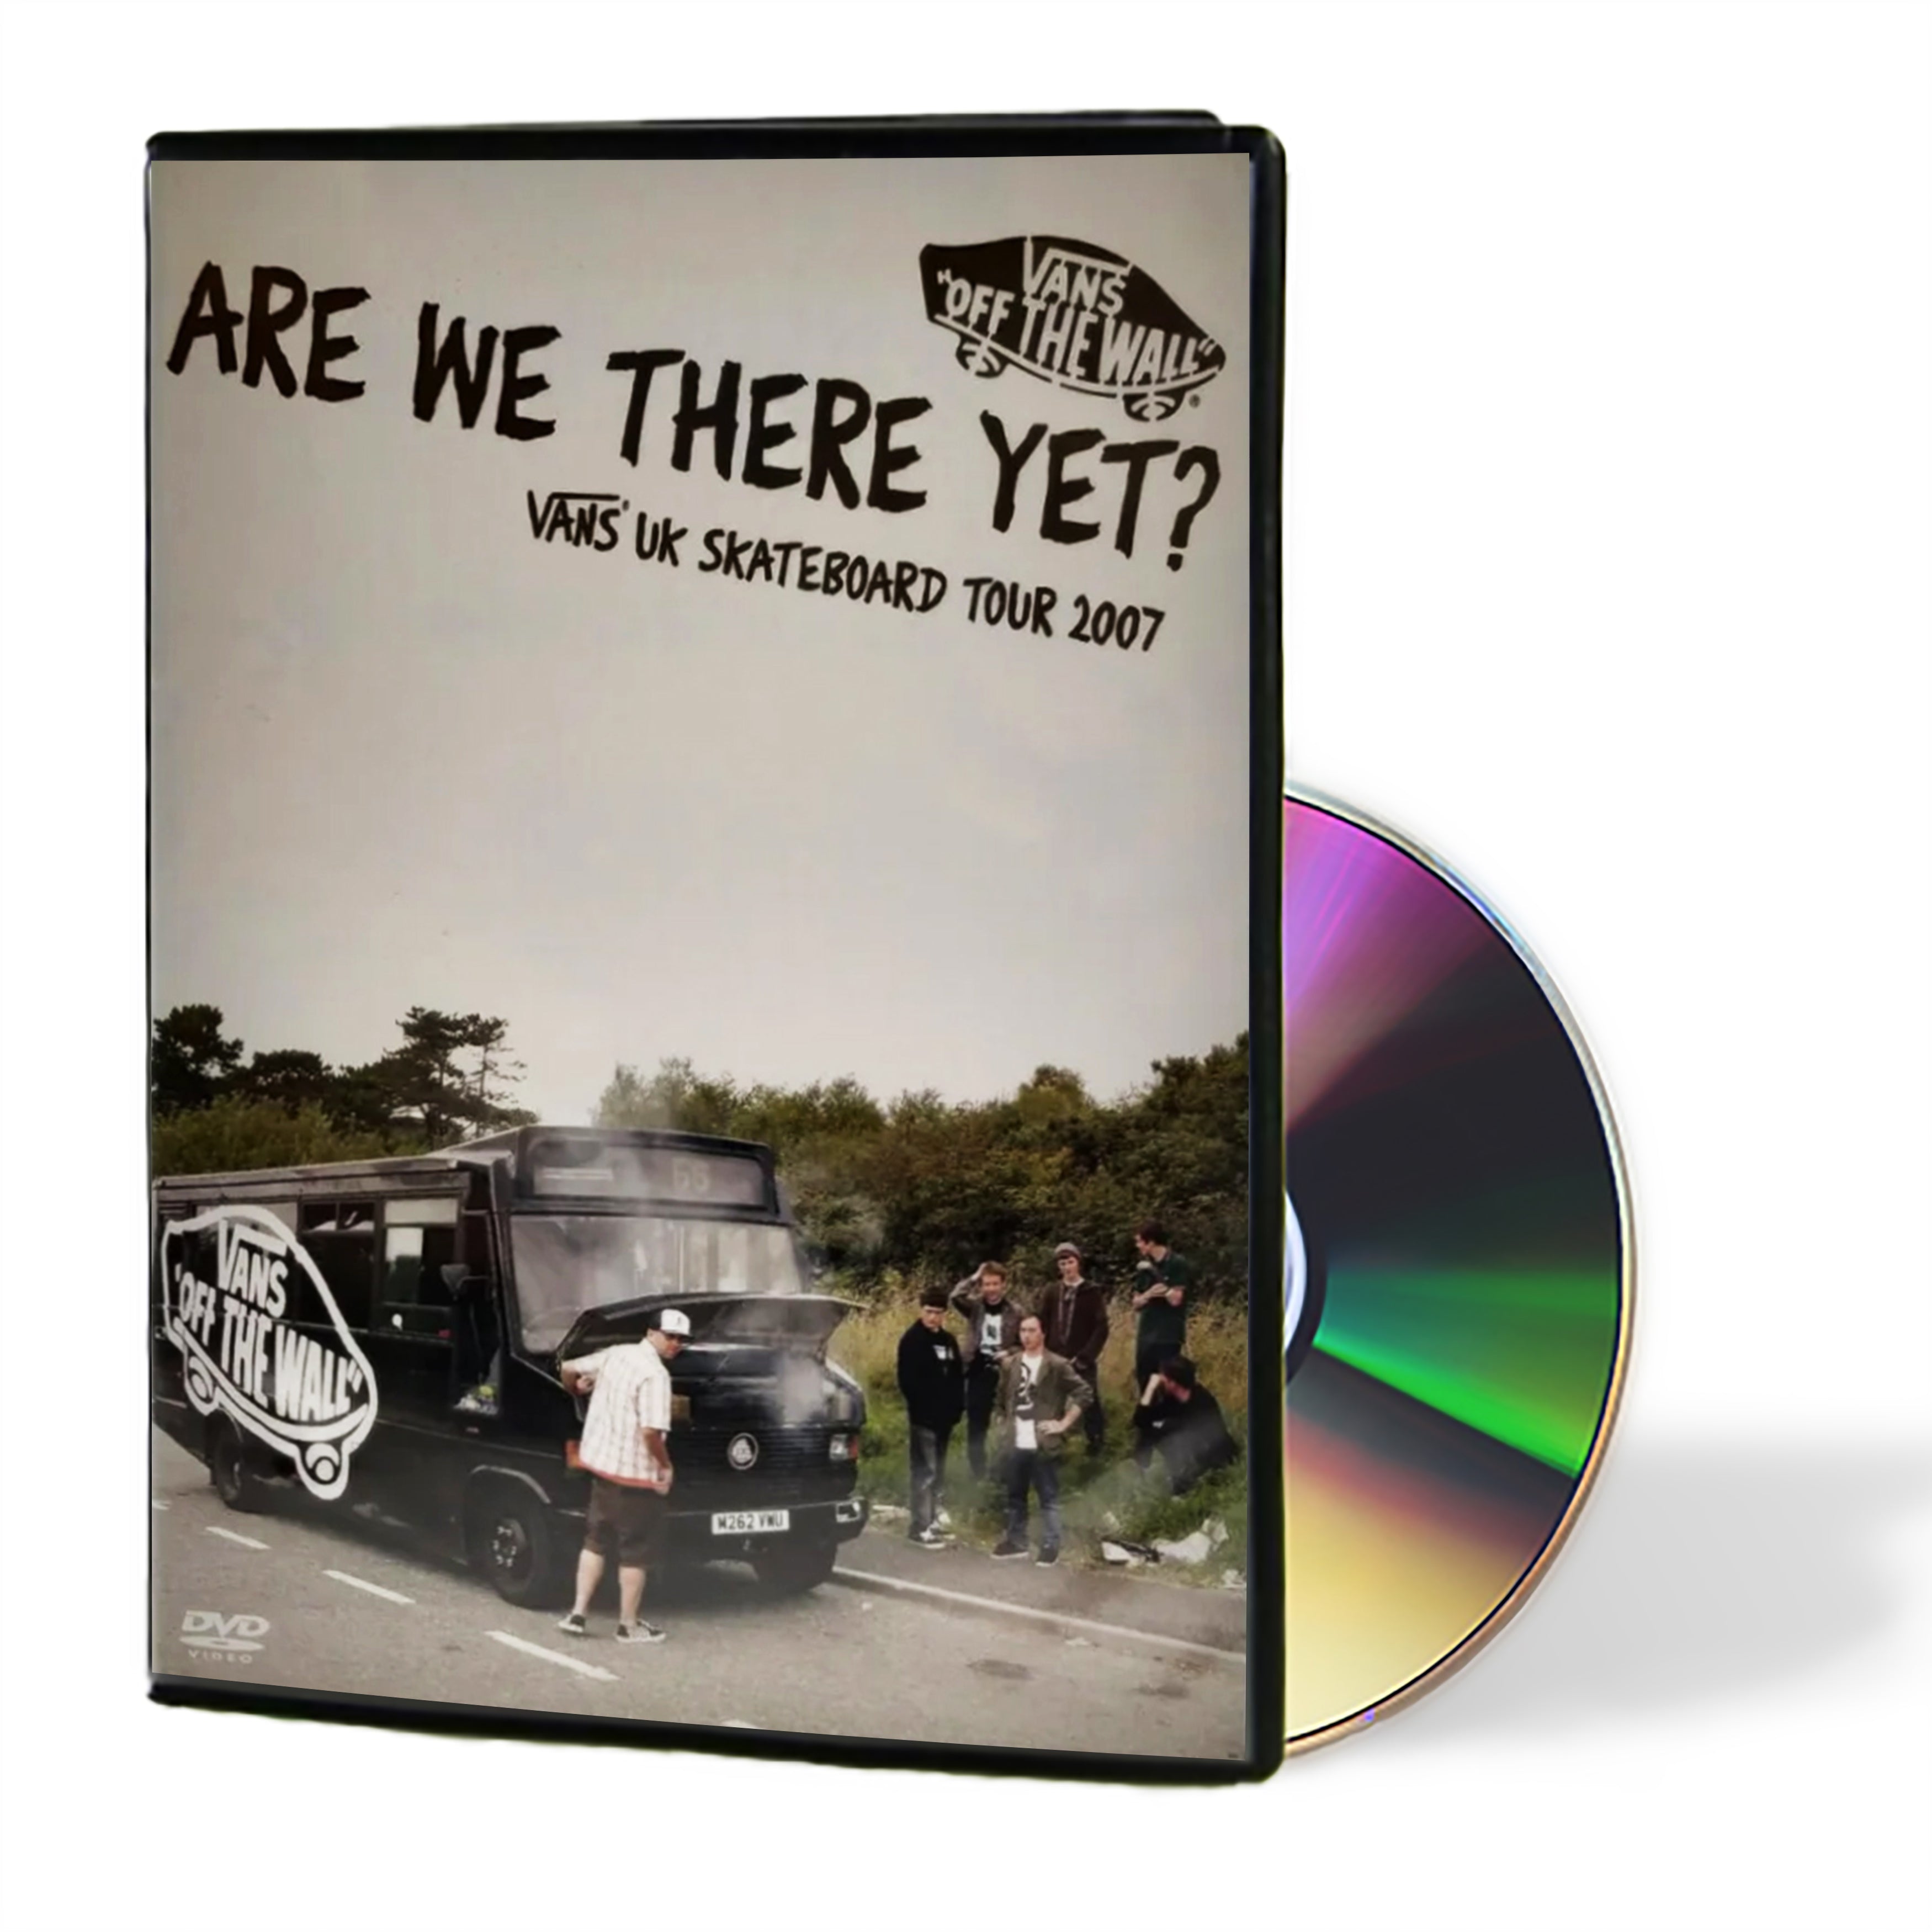 Are we there Yet? VANS UK Skateboard Tour 2007 DVD